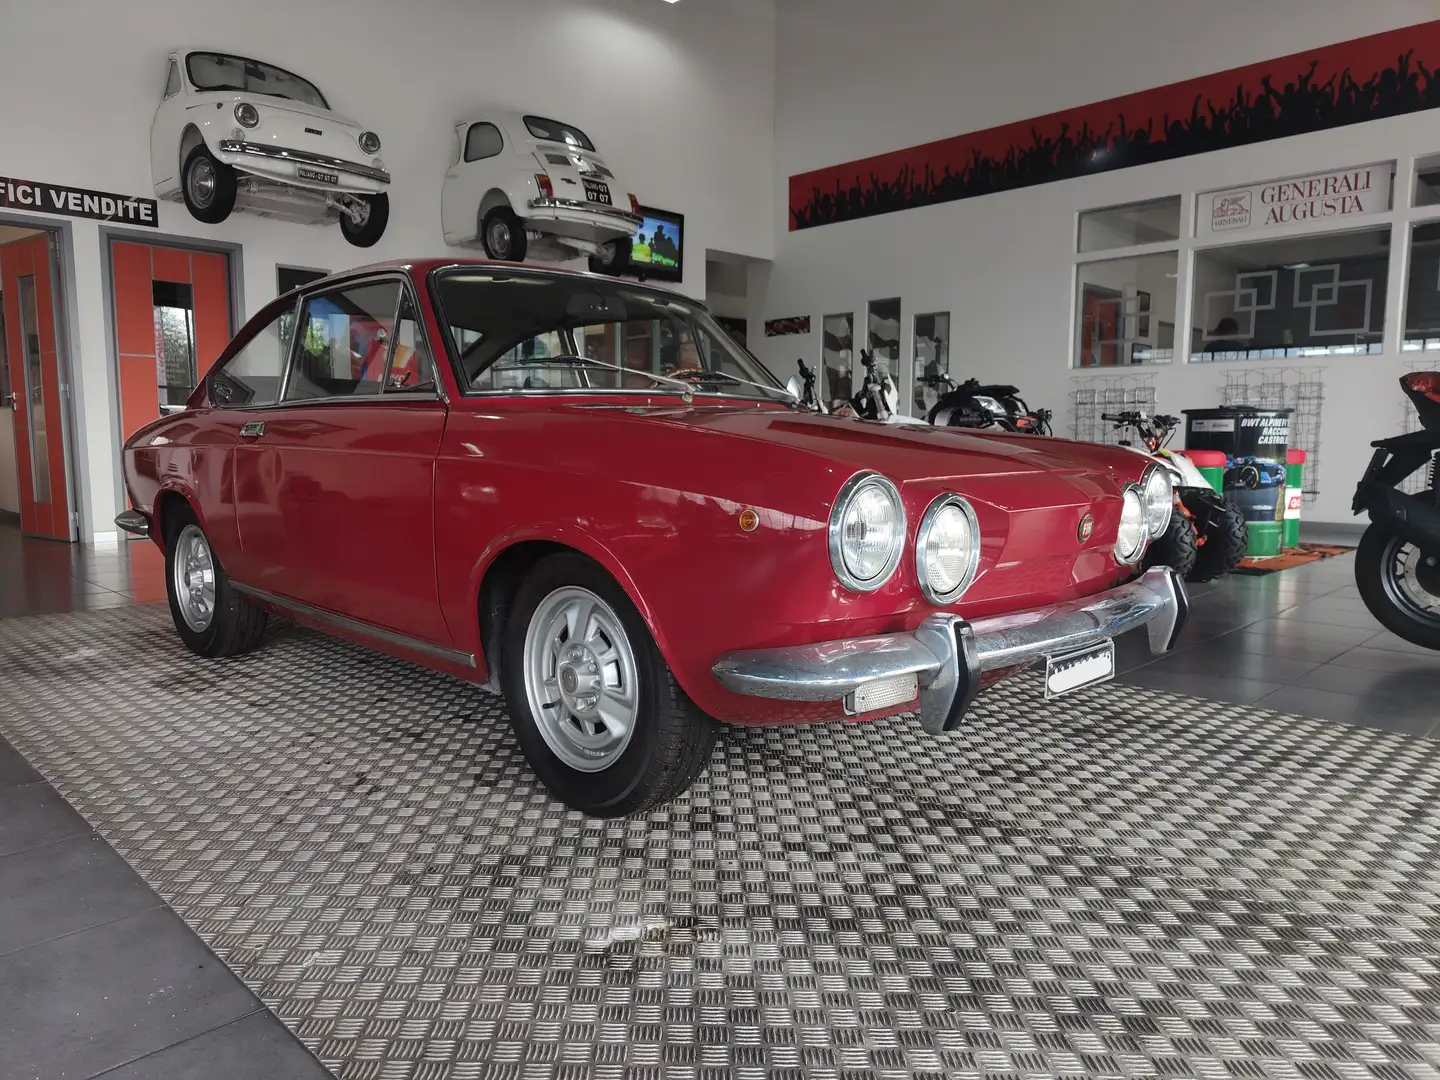 Fiat 850 SPORT COUPE' "AUTO STORICA" A.S.I Rood - 1